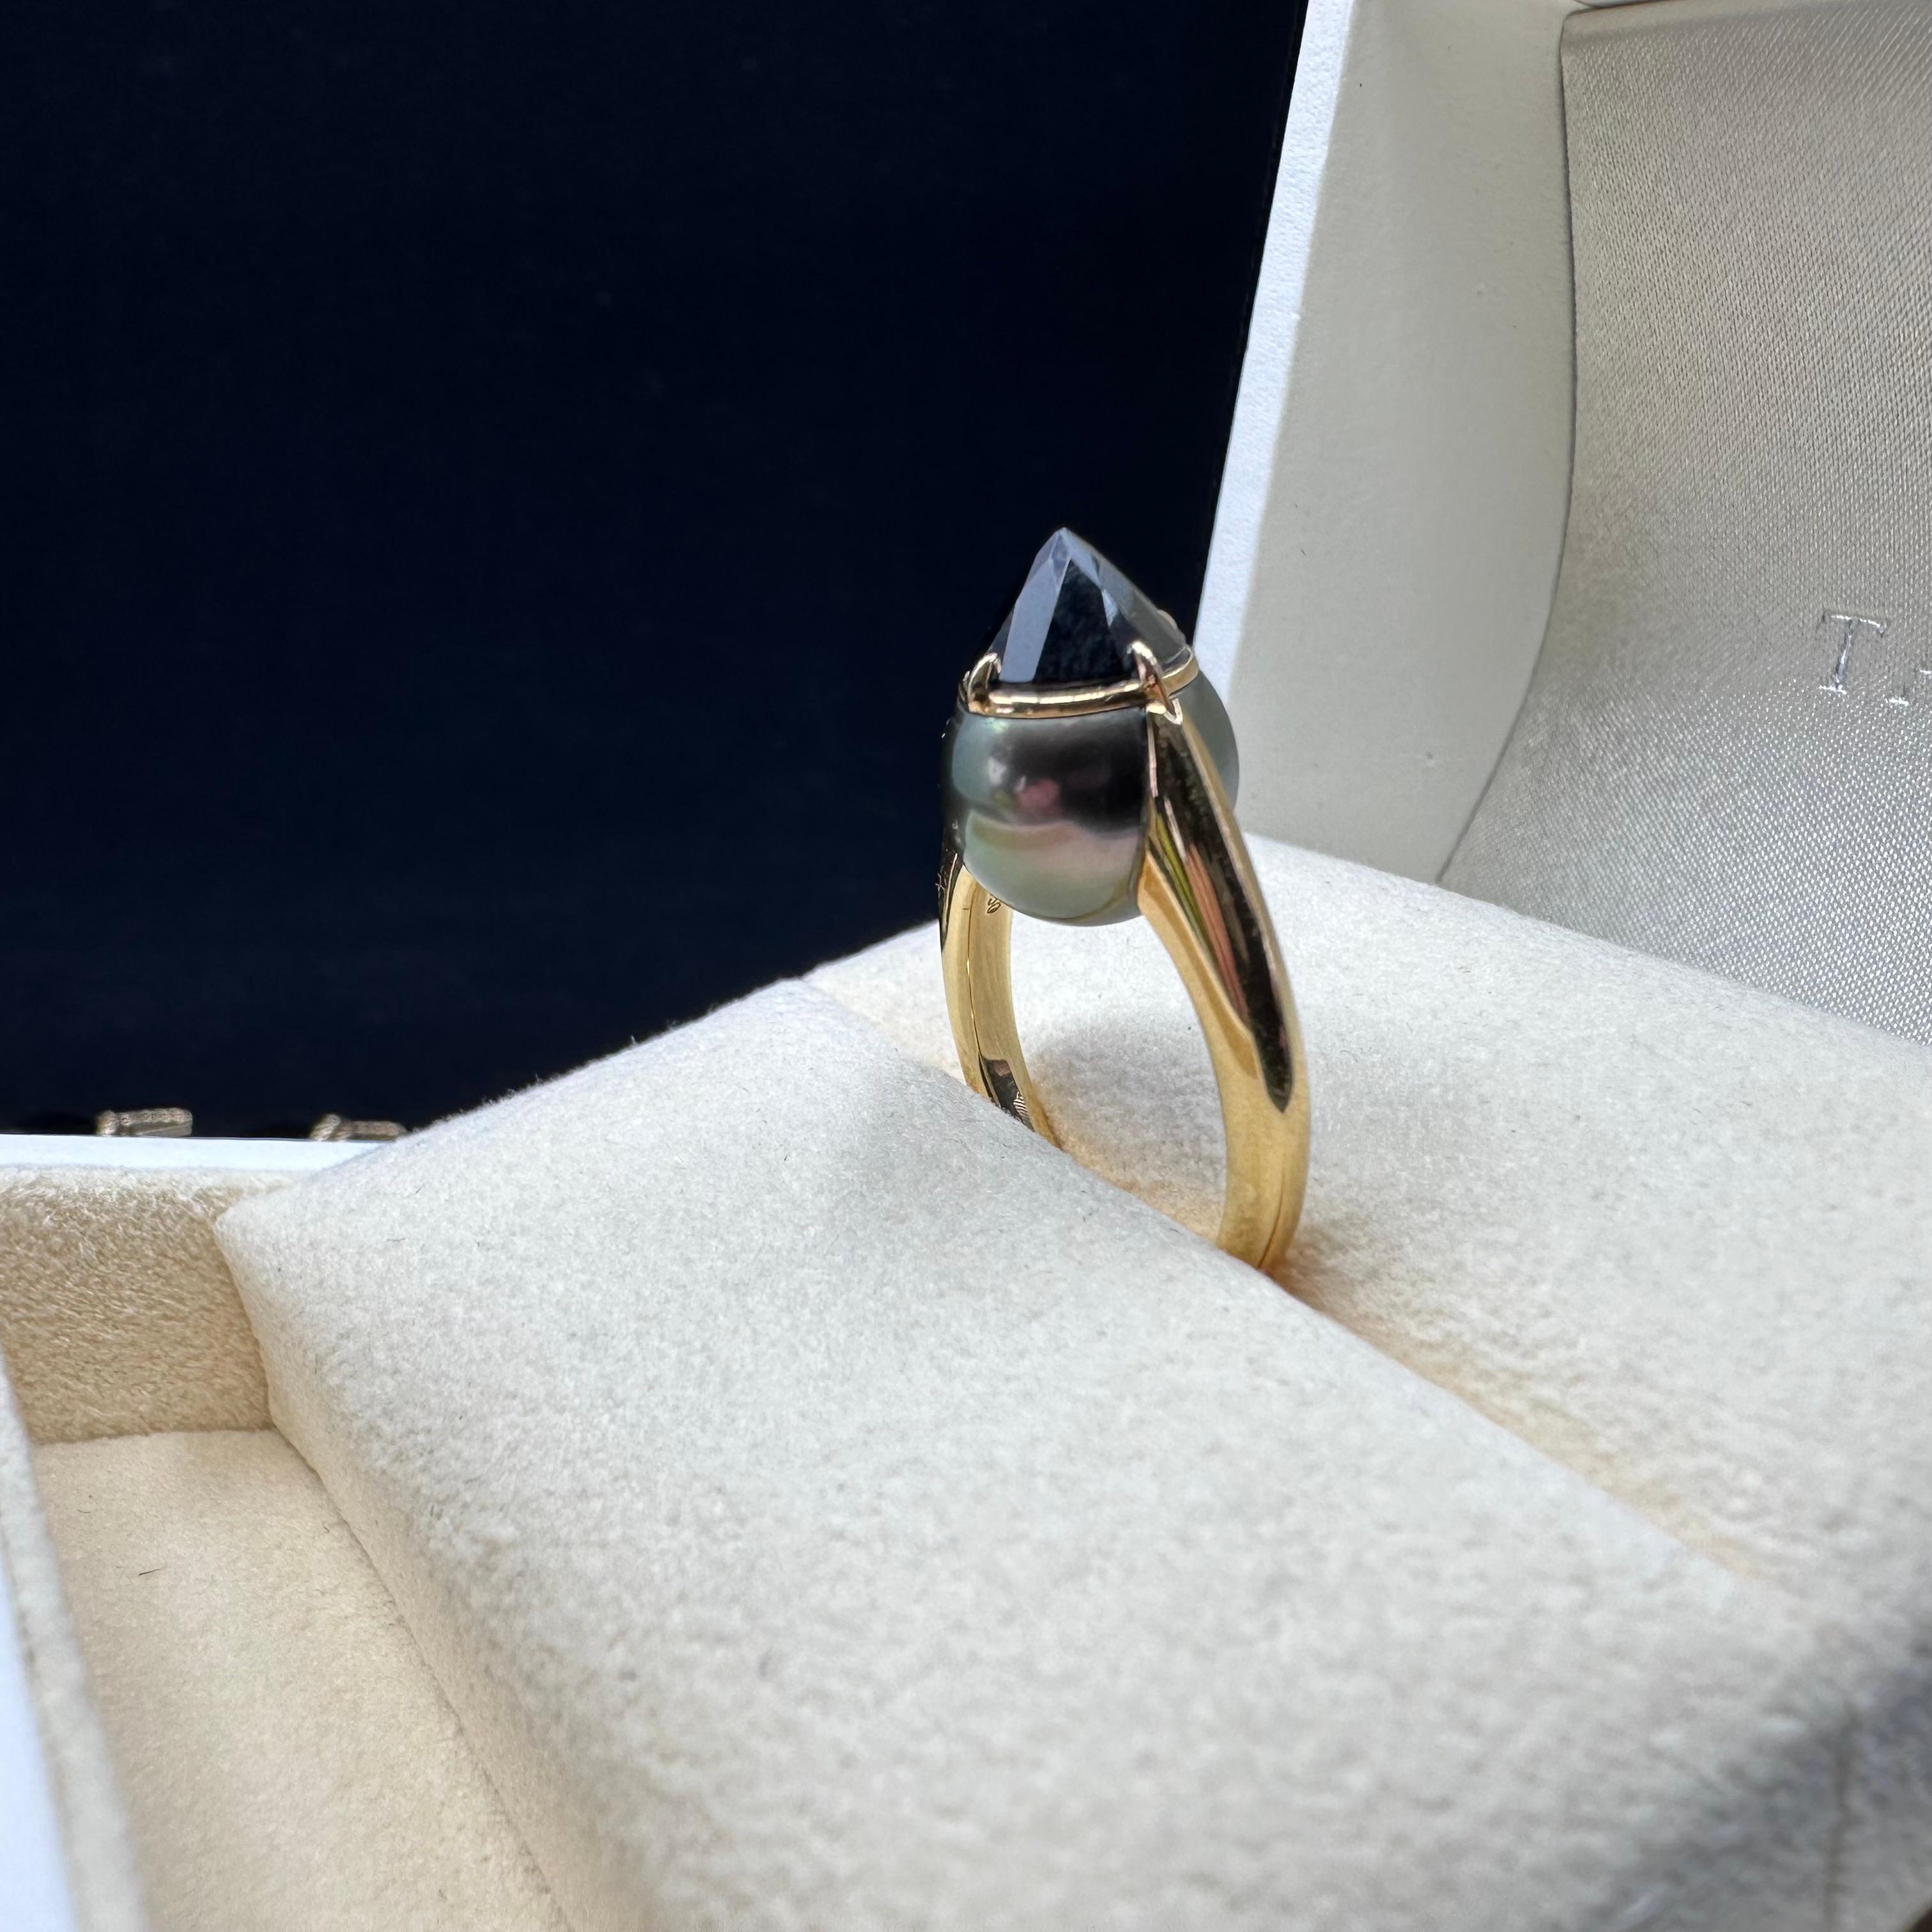 Vintage Original Tasaki's Refined Rebellion Signature Black Spinel Yellow Gold Ring. 
Seamlessly Connecting Yellow Gold, Natural South Sea Pearl, and a Round Brilliant Cut Black Spinel Ring.
The ‘refined rebellion’ collection features sophisticated